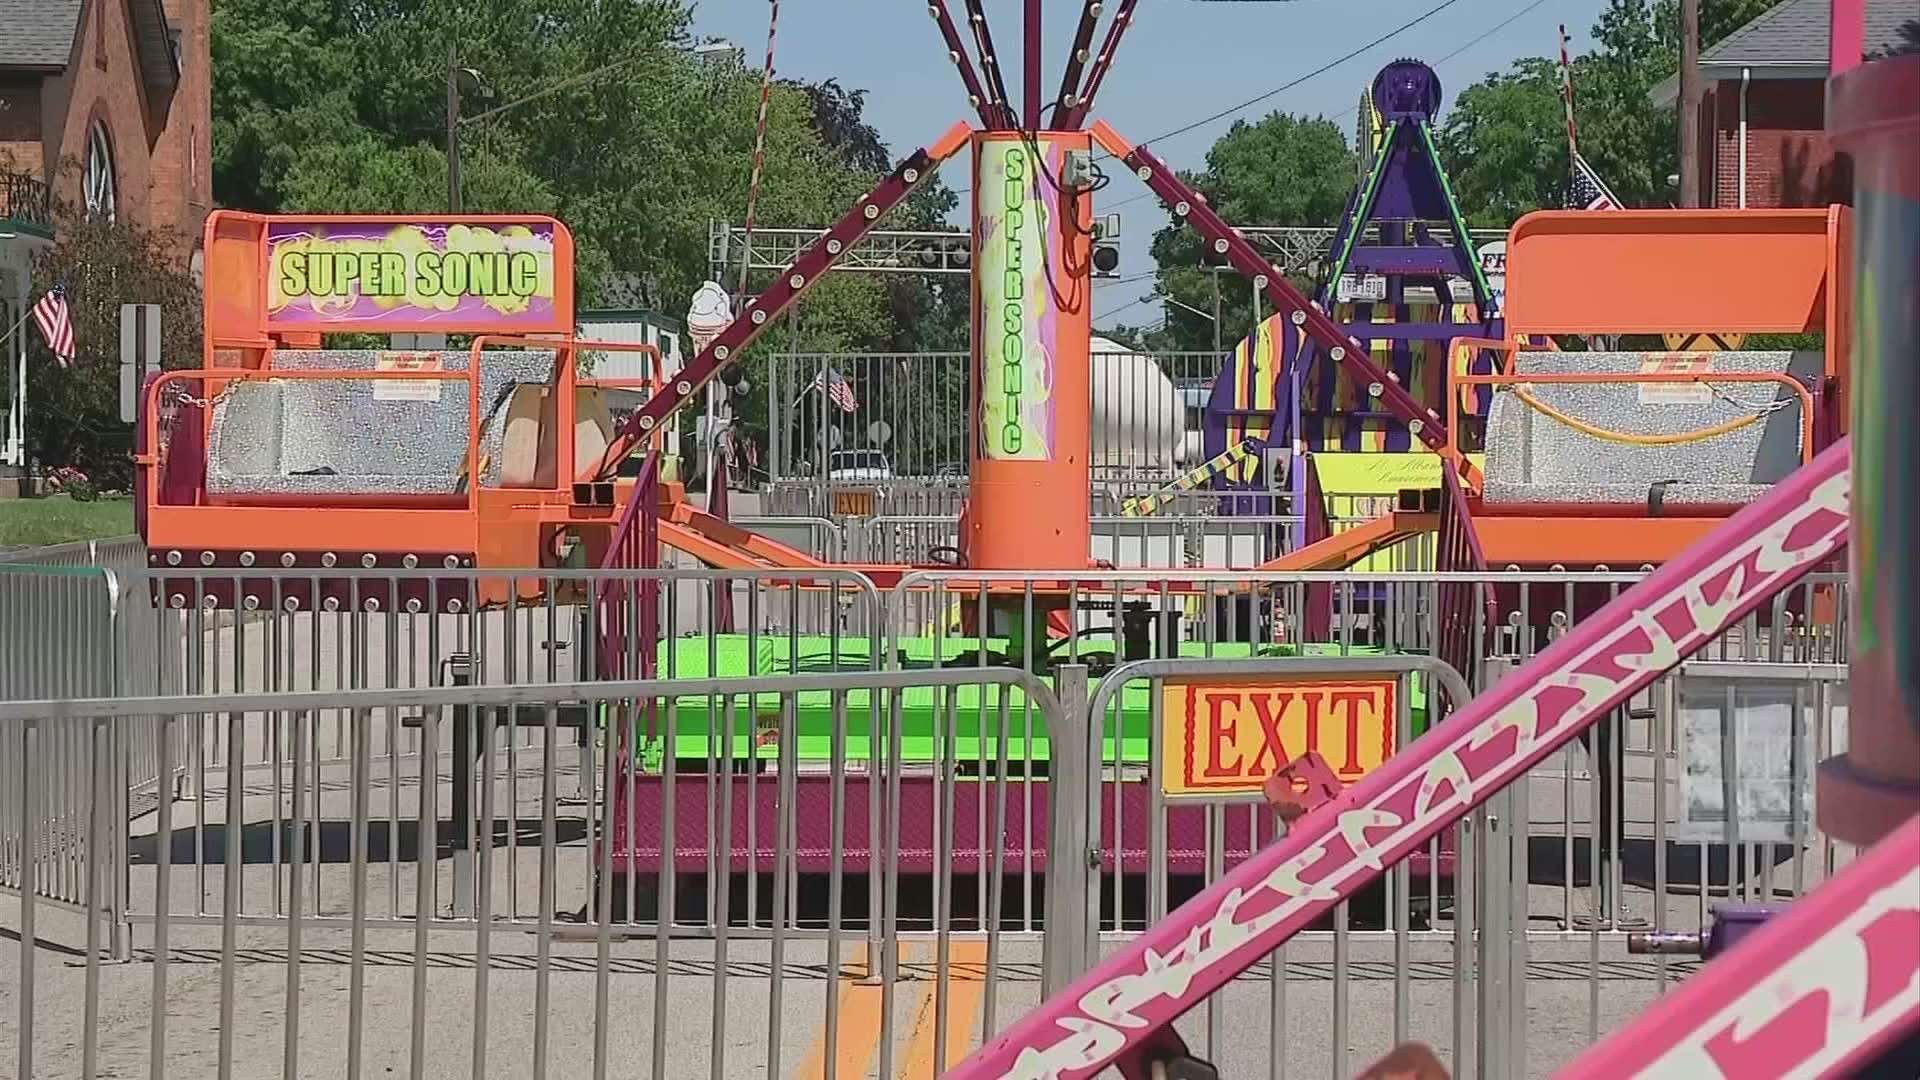 This year, rides are back at fairs across the state, including at the popular Ohio State Fair. And it's a bittersweet moment for one mother.